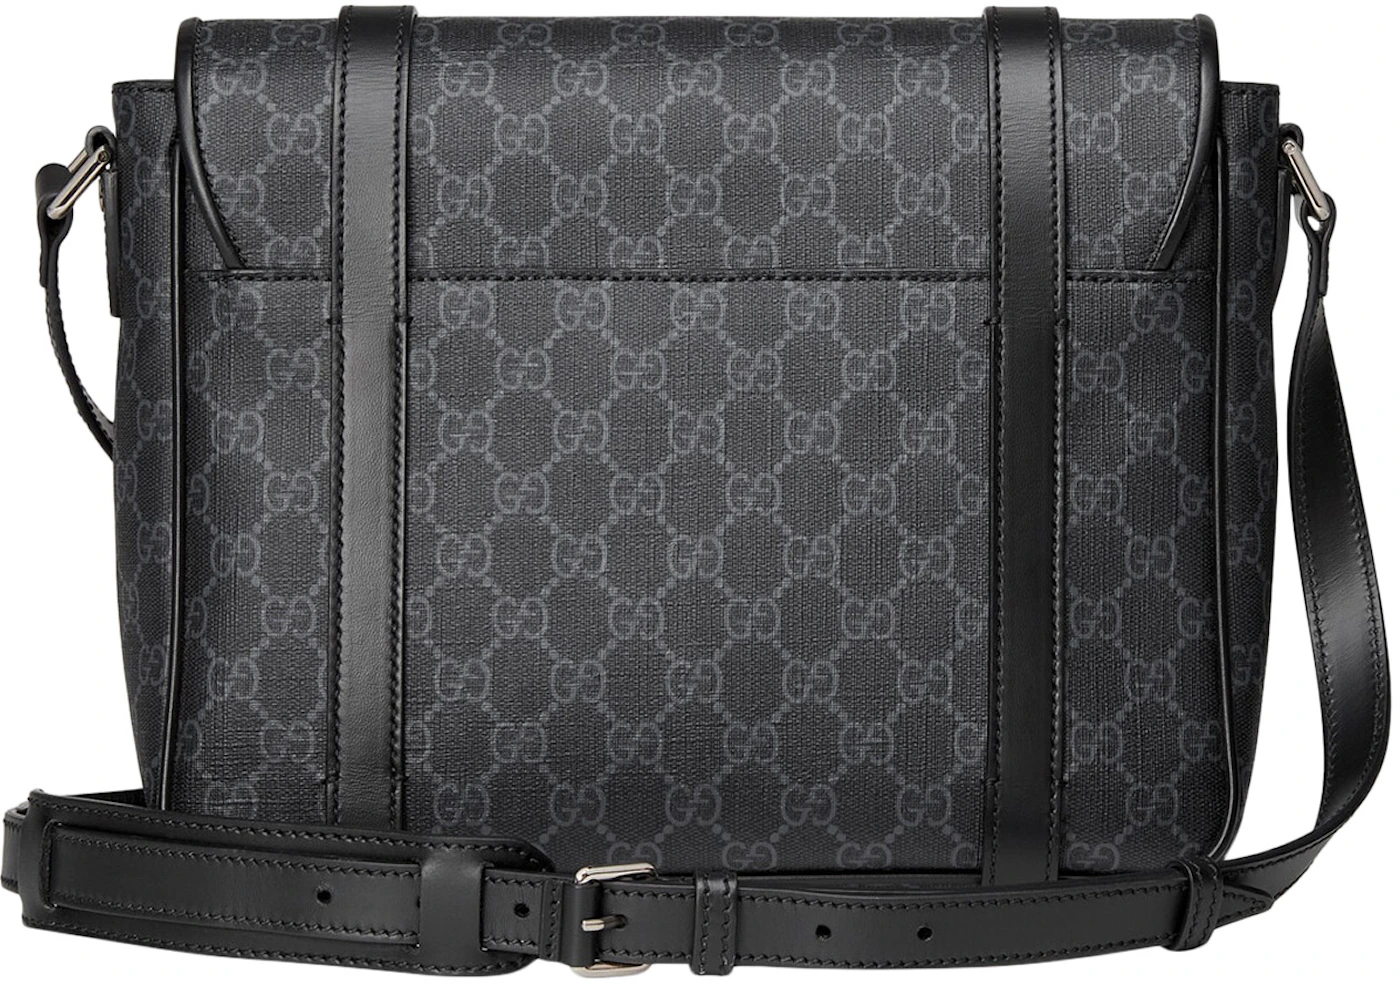 Gucci Messenger Bag GG Supreme Canvas Black/Grey in Canvas with Silver ...